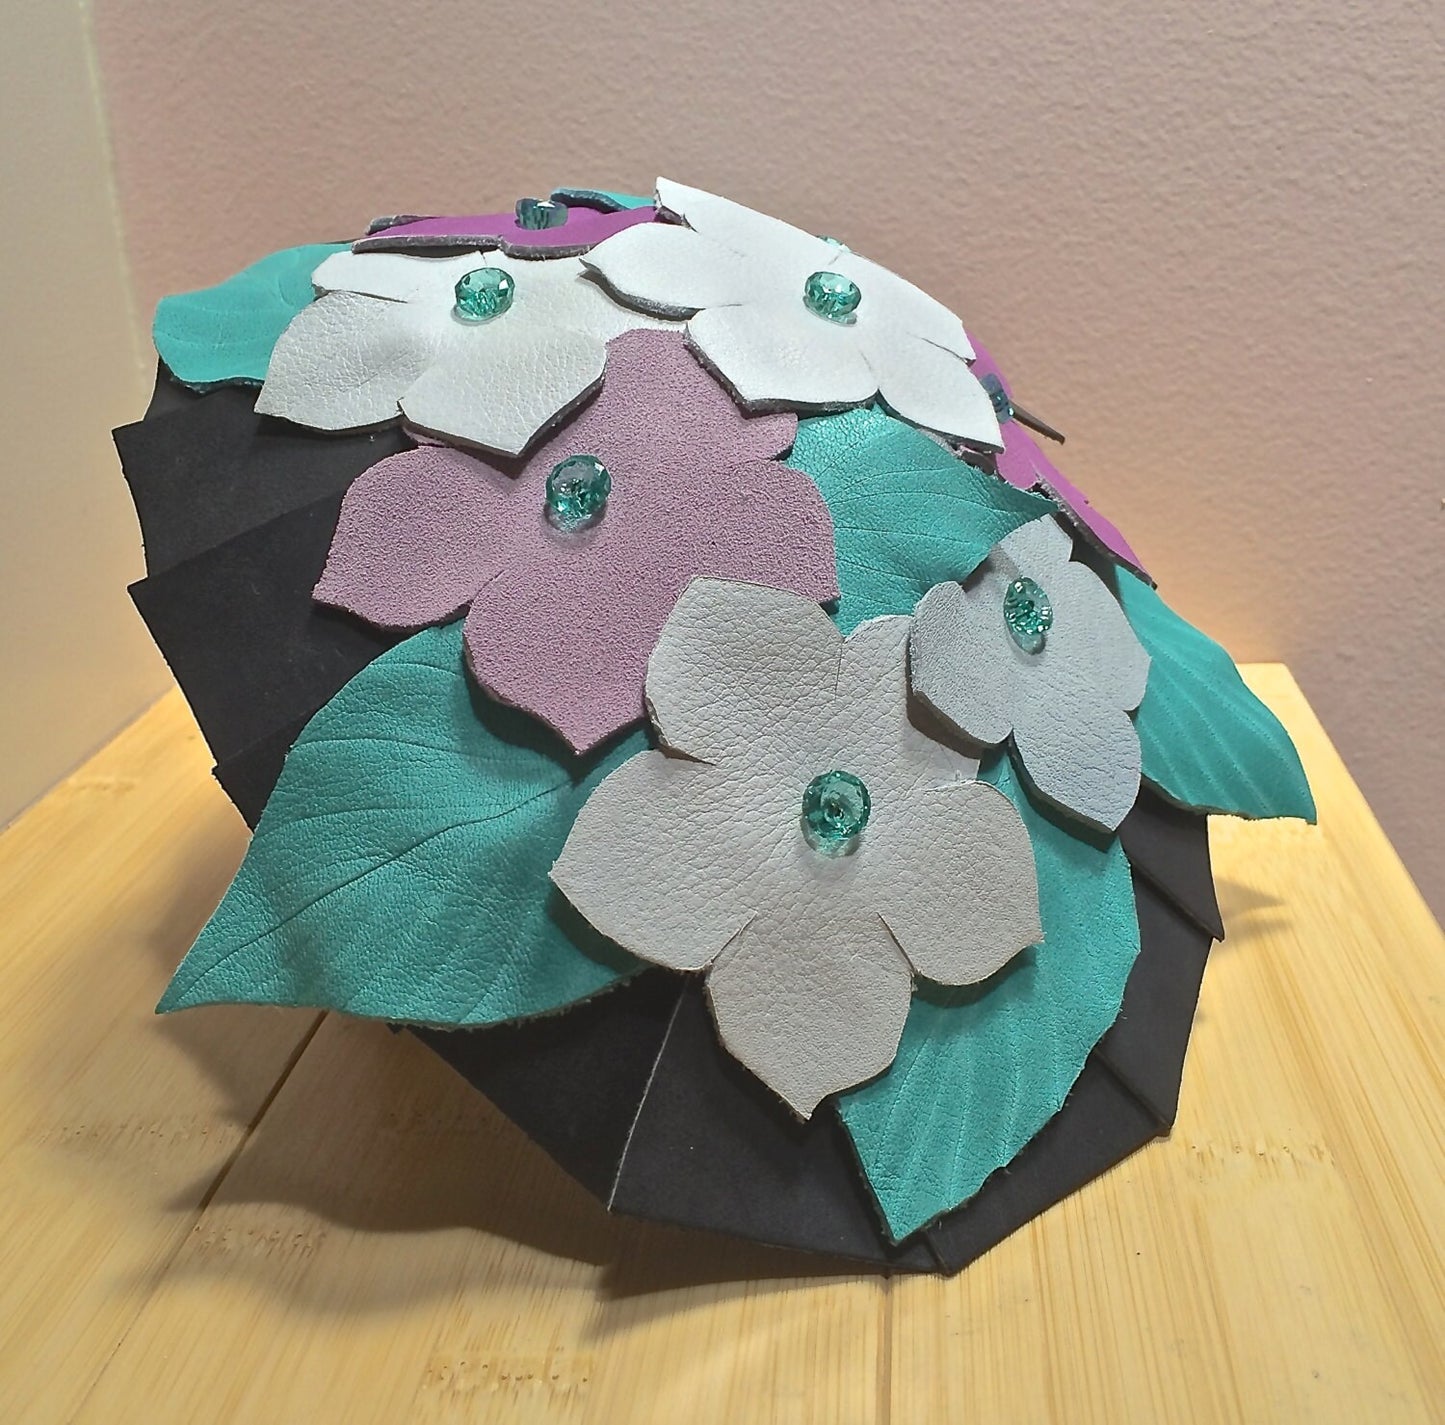 Fascinator, Leather fashion hat, turquoise floral leather hat, Leather fascinator. Garden Party or Wedding hat. Turquoise and violet flowers